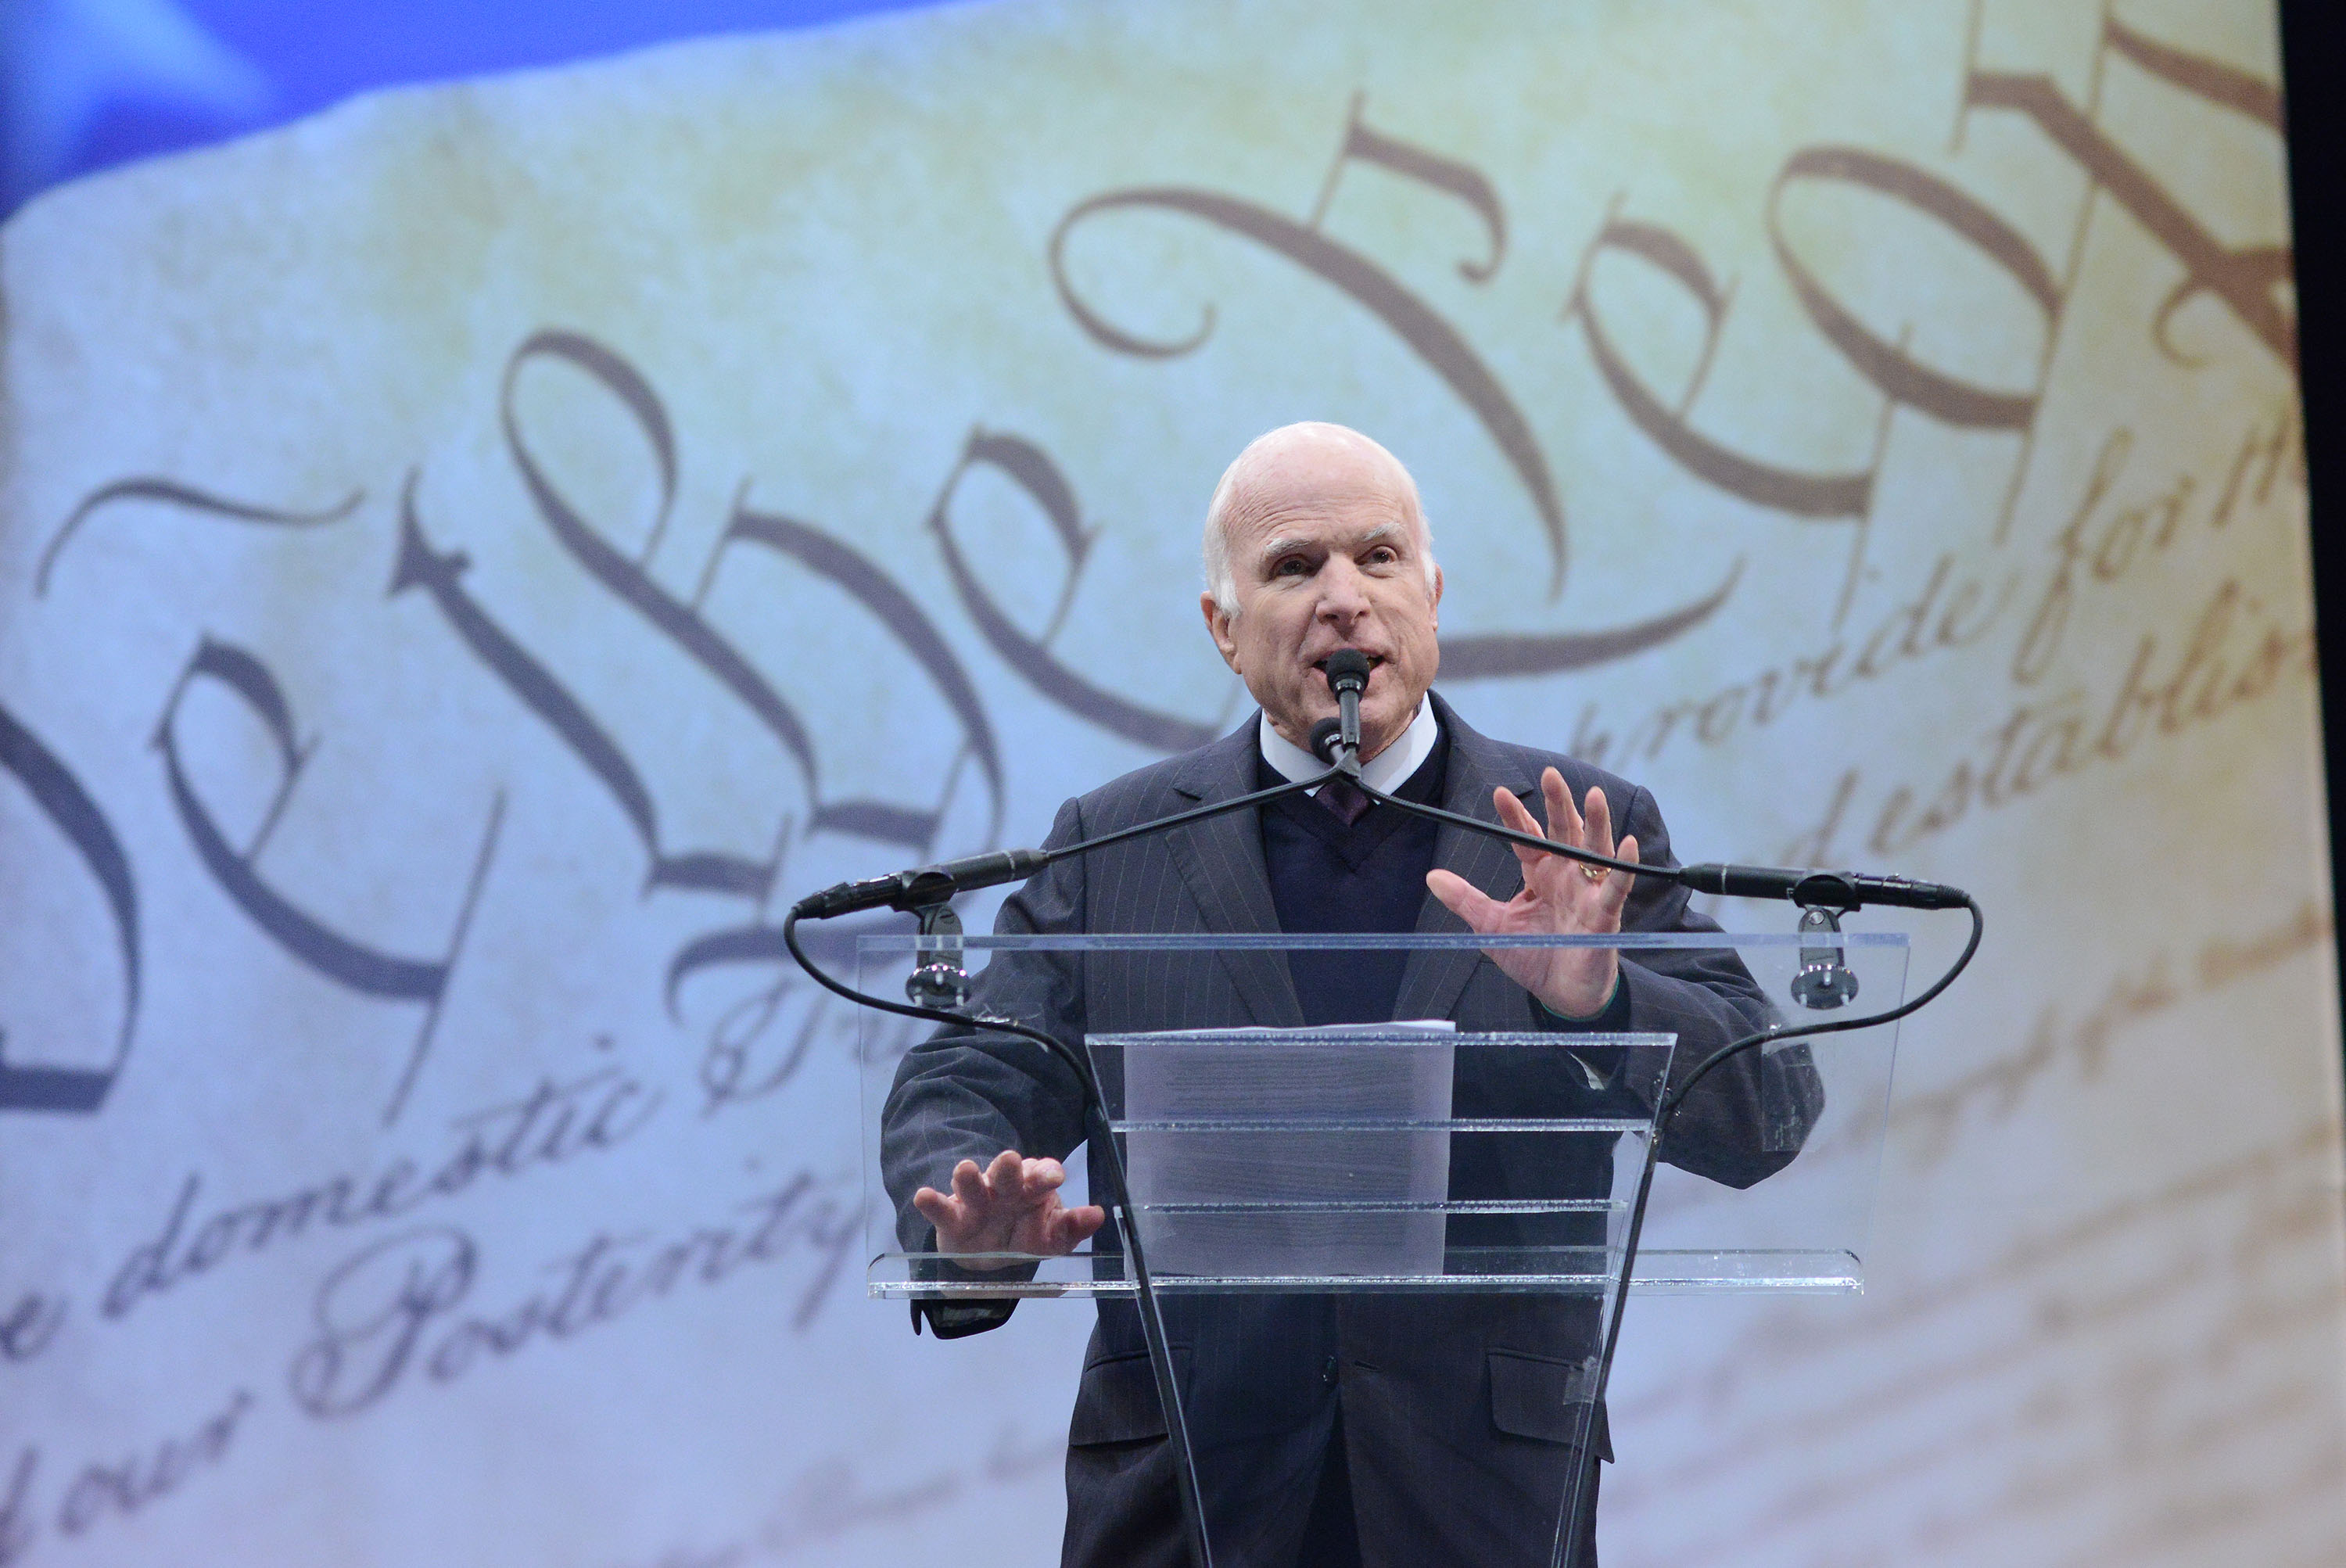 Sen. John McCain (R-AZ) makes remarks after receiving the the 2017 Liberty Medal from former Vice President Joe Biden at the National Constitution Center on Oct. 16, 2017 in Philadelphia. (William Thomas Cain—Getty Images)